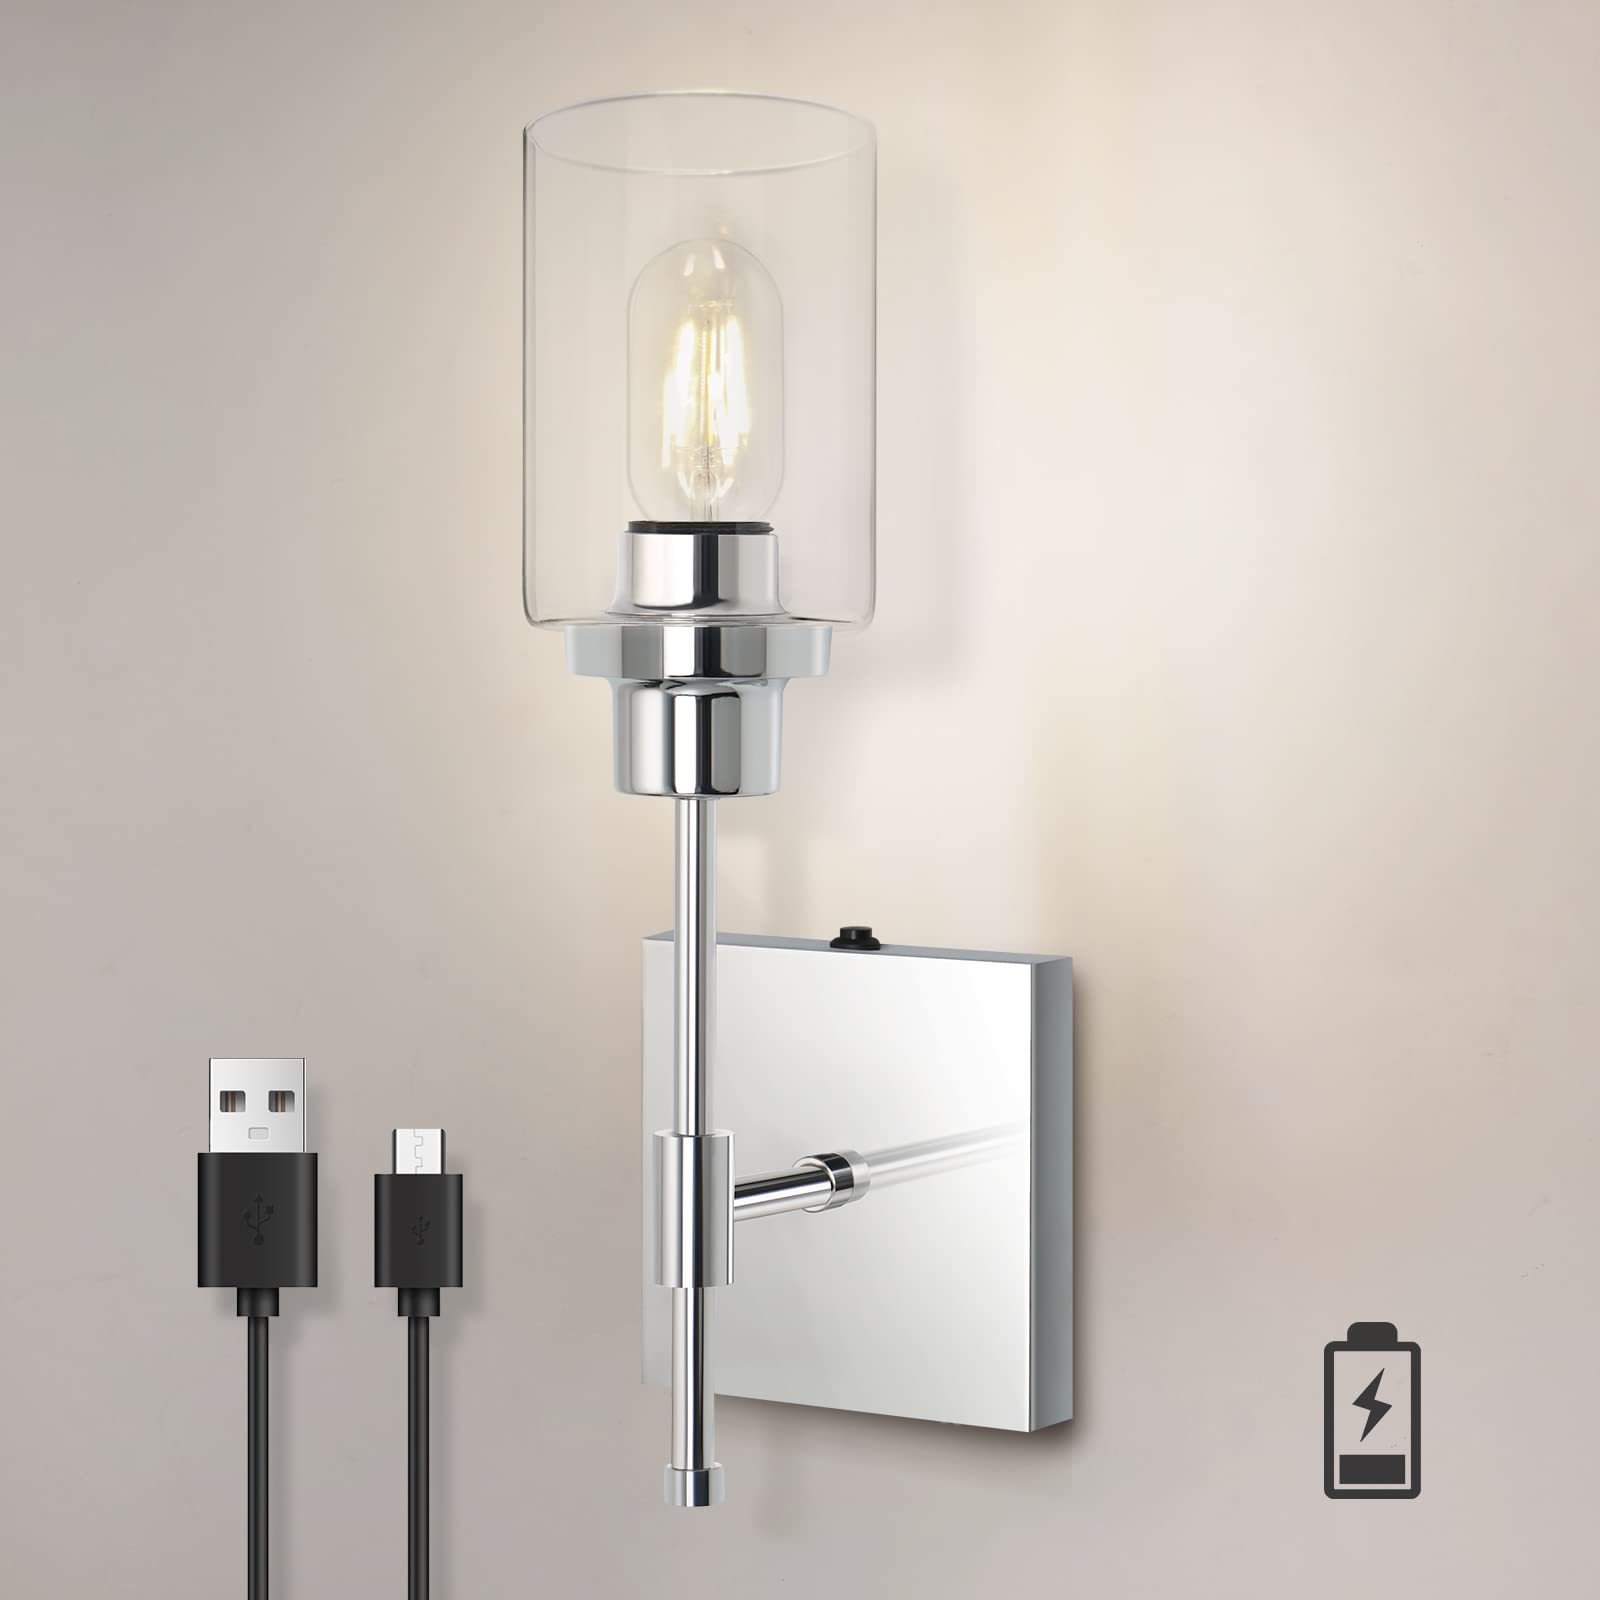 C01 Battery Operated Wall Sconces Cordless Rechargeable with Glass Shade for Bedroom